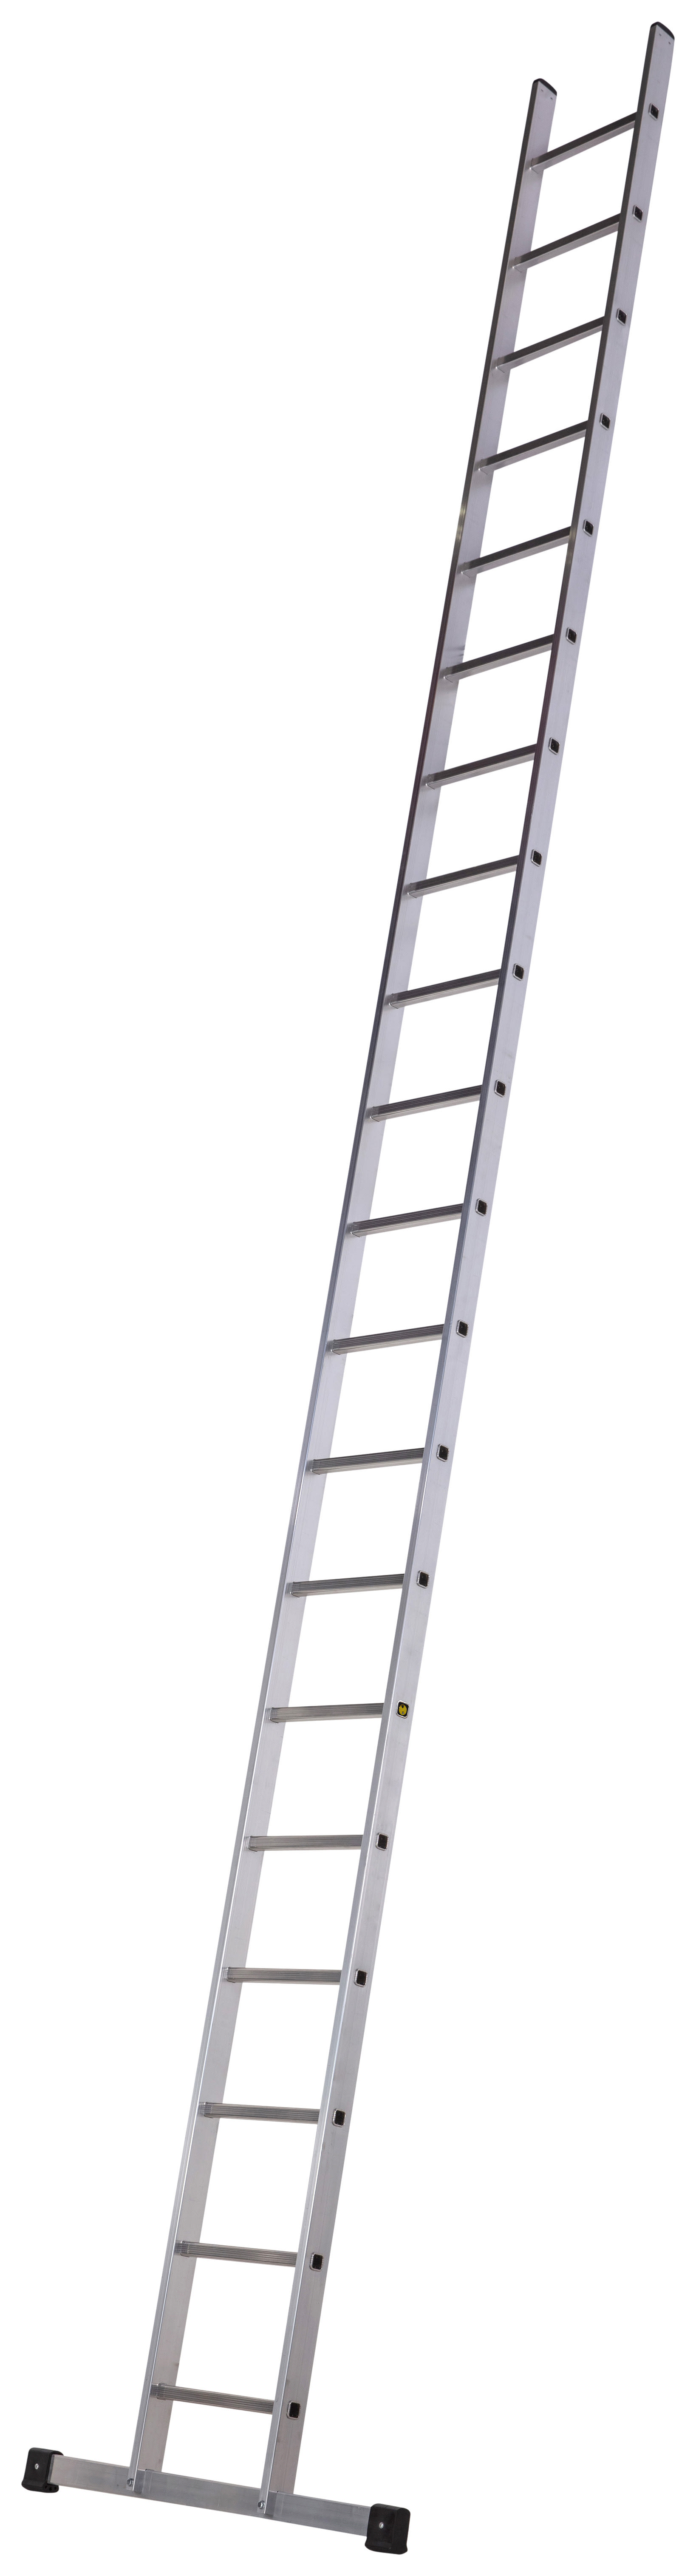 Werner Square Rung Pro Single Section Trade Ladder